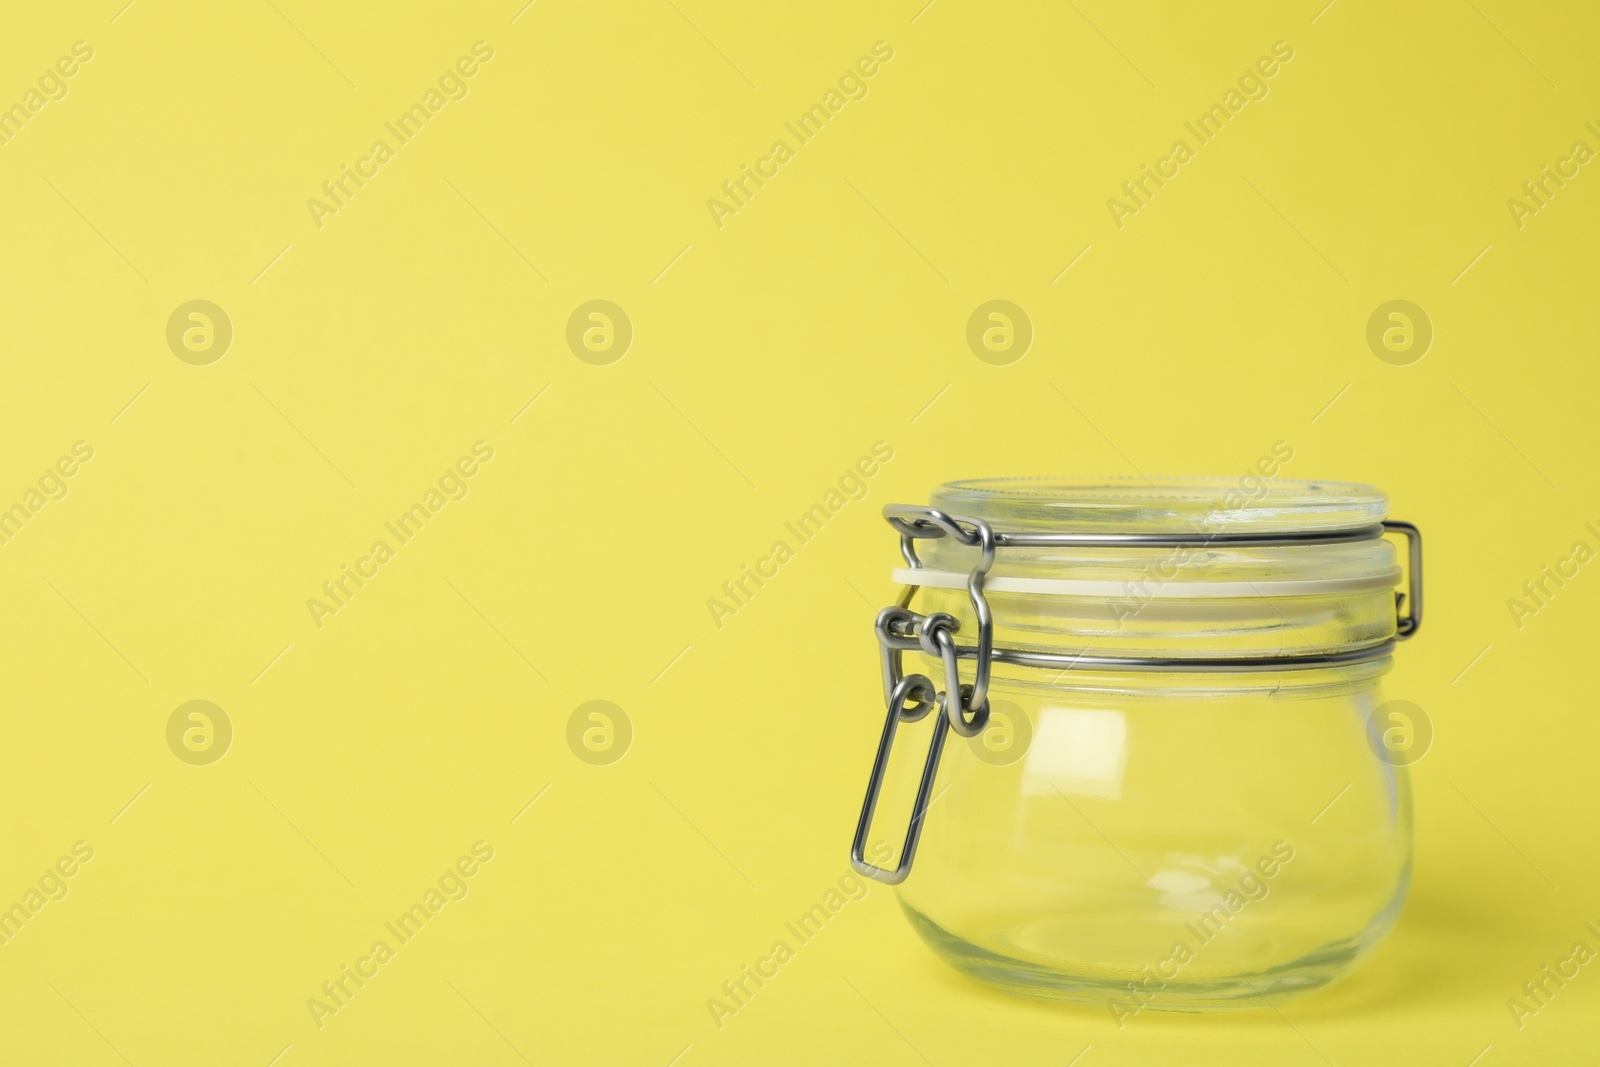 Photo of Closed empty glass jar on light yellow background, space for text